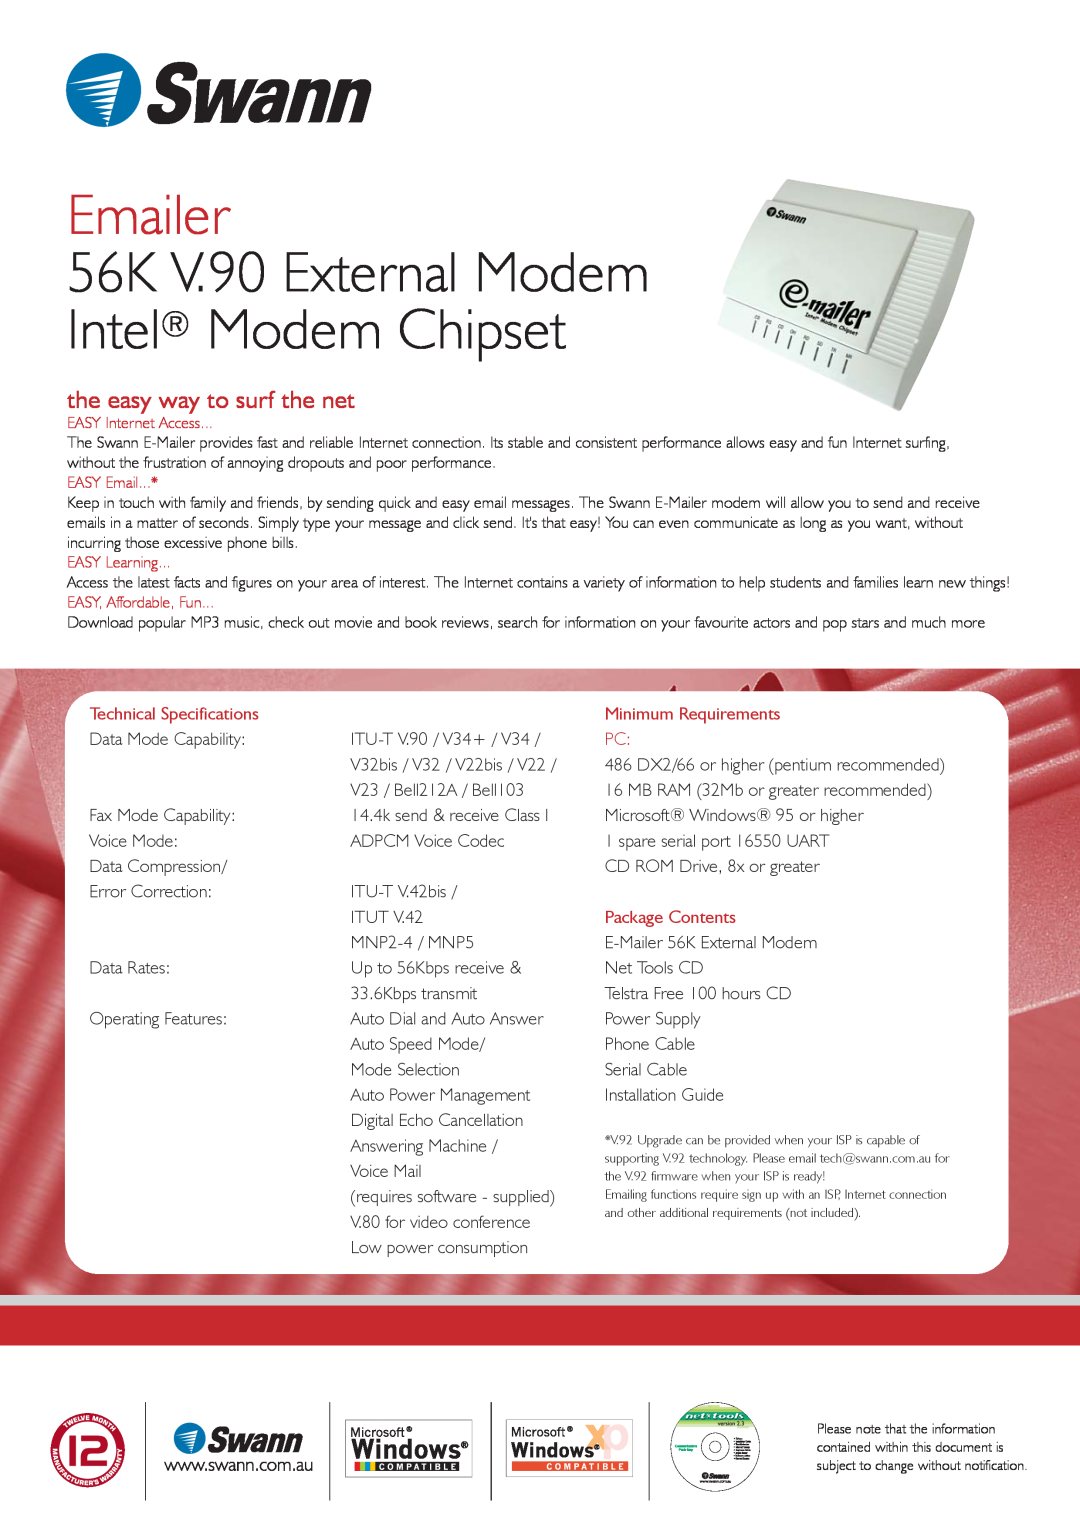 Swann Emailer, 56K V.90 External Modem Intel Modem Chipset, the easy way to surf the net, Technical Specifications 